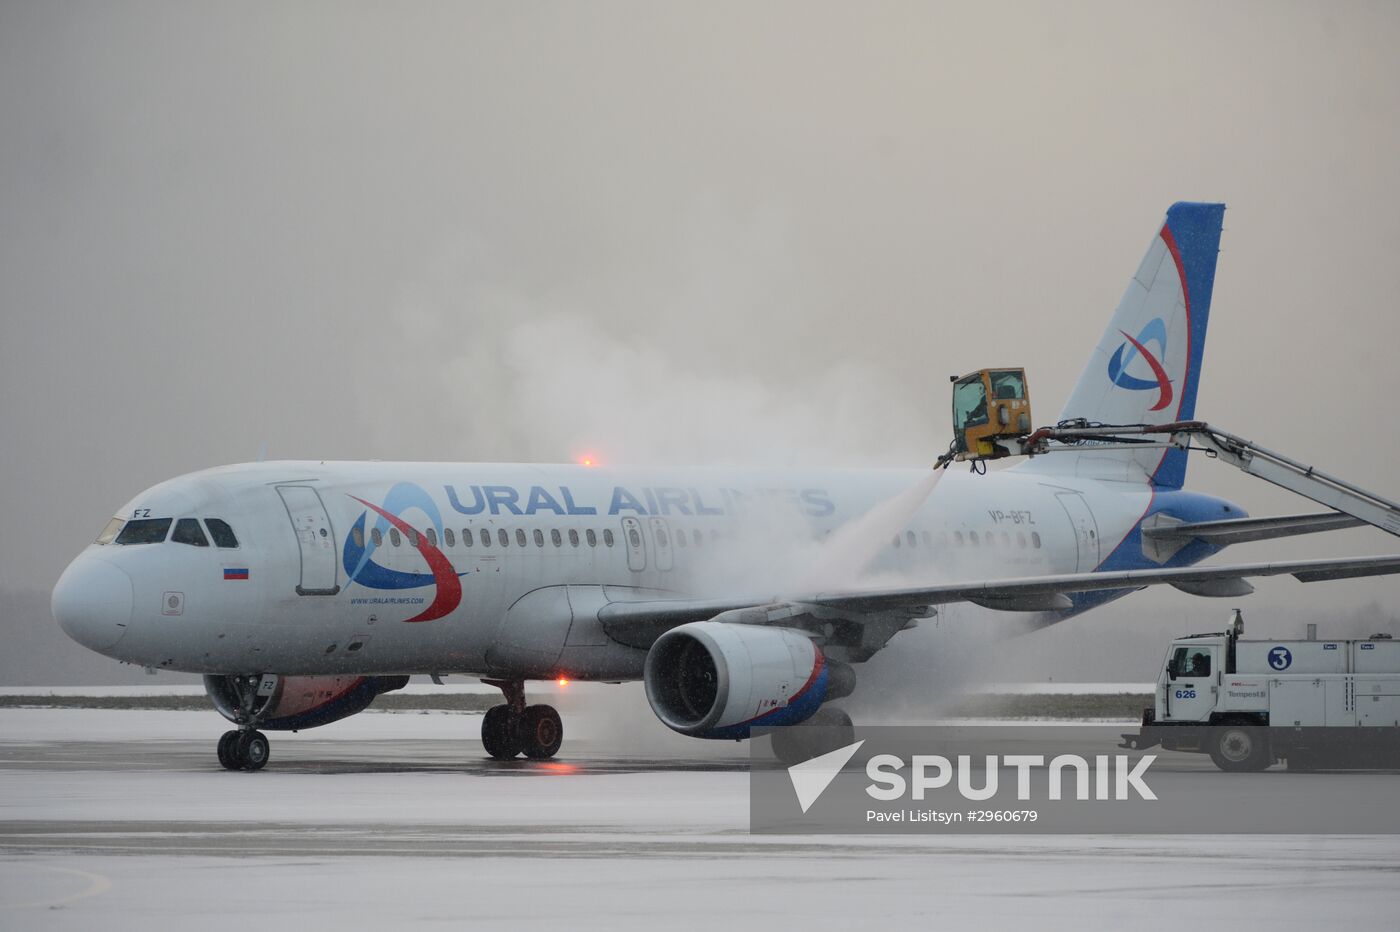 Ural Airlines aircraft